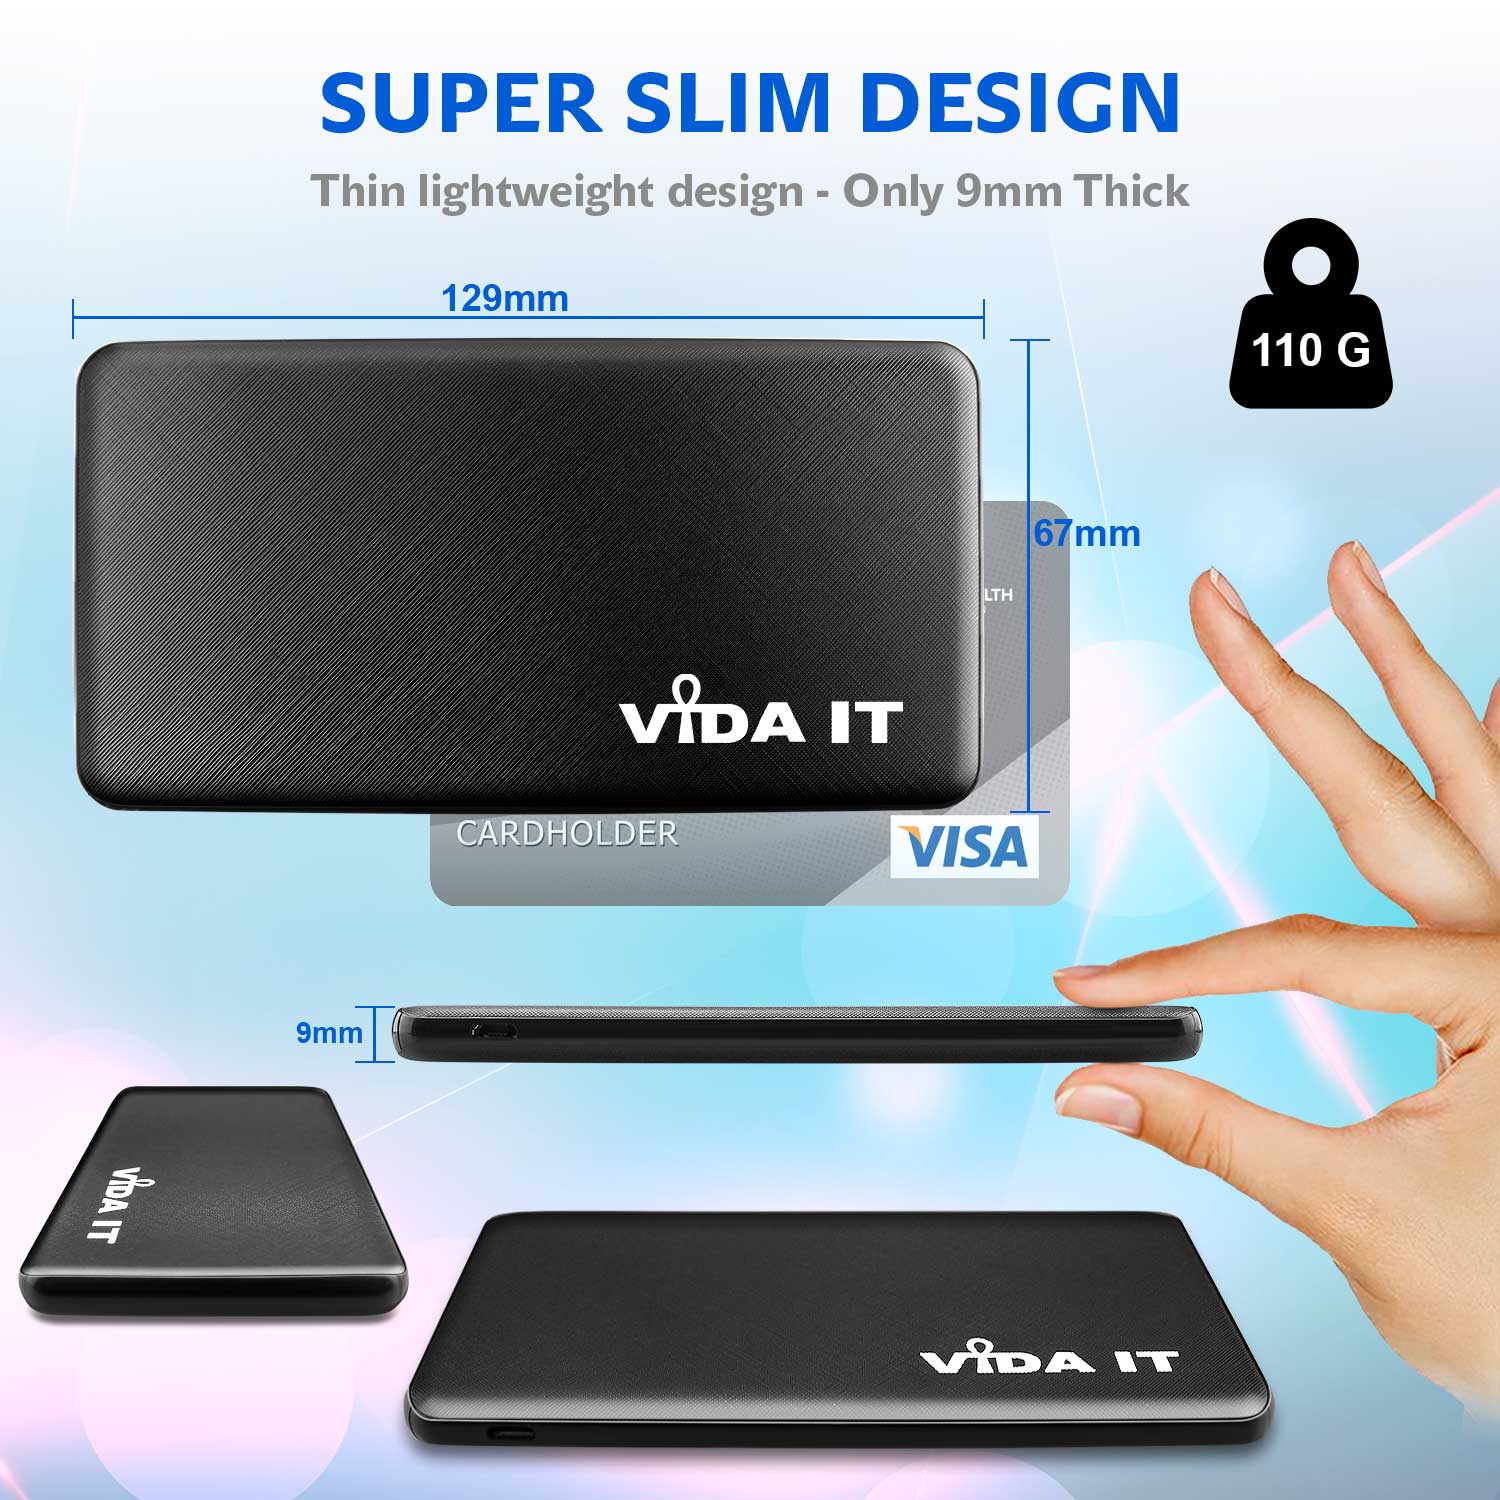 Vida IT V506 Lightweight 9mm Slim Design Travel 3 Port 5000mAh Power Bank Fast Charging 2A Portable External Emergency Battery Pack USB Charger in Black Colour with USB cable and iPhone and USB-C Adapters